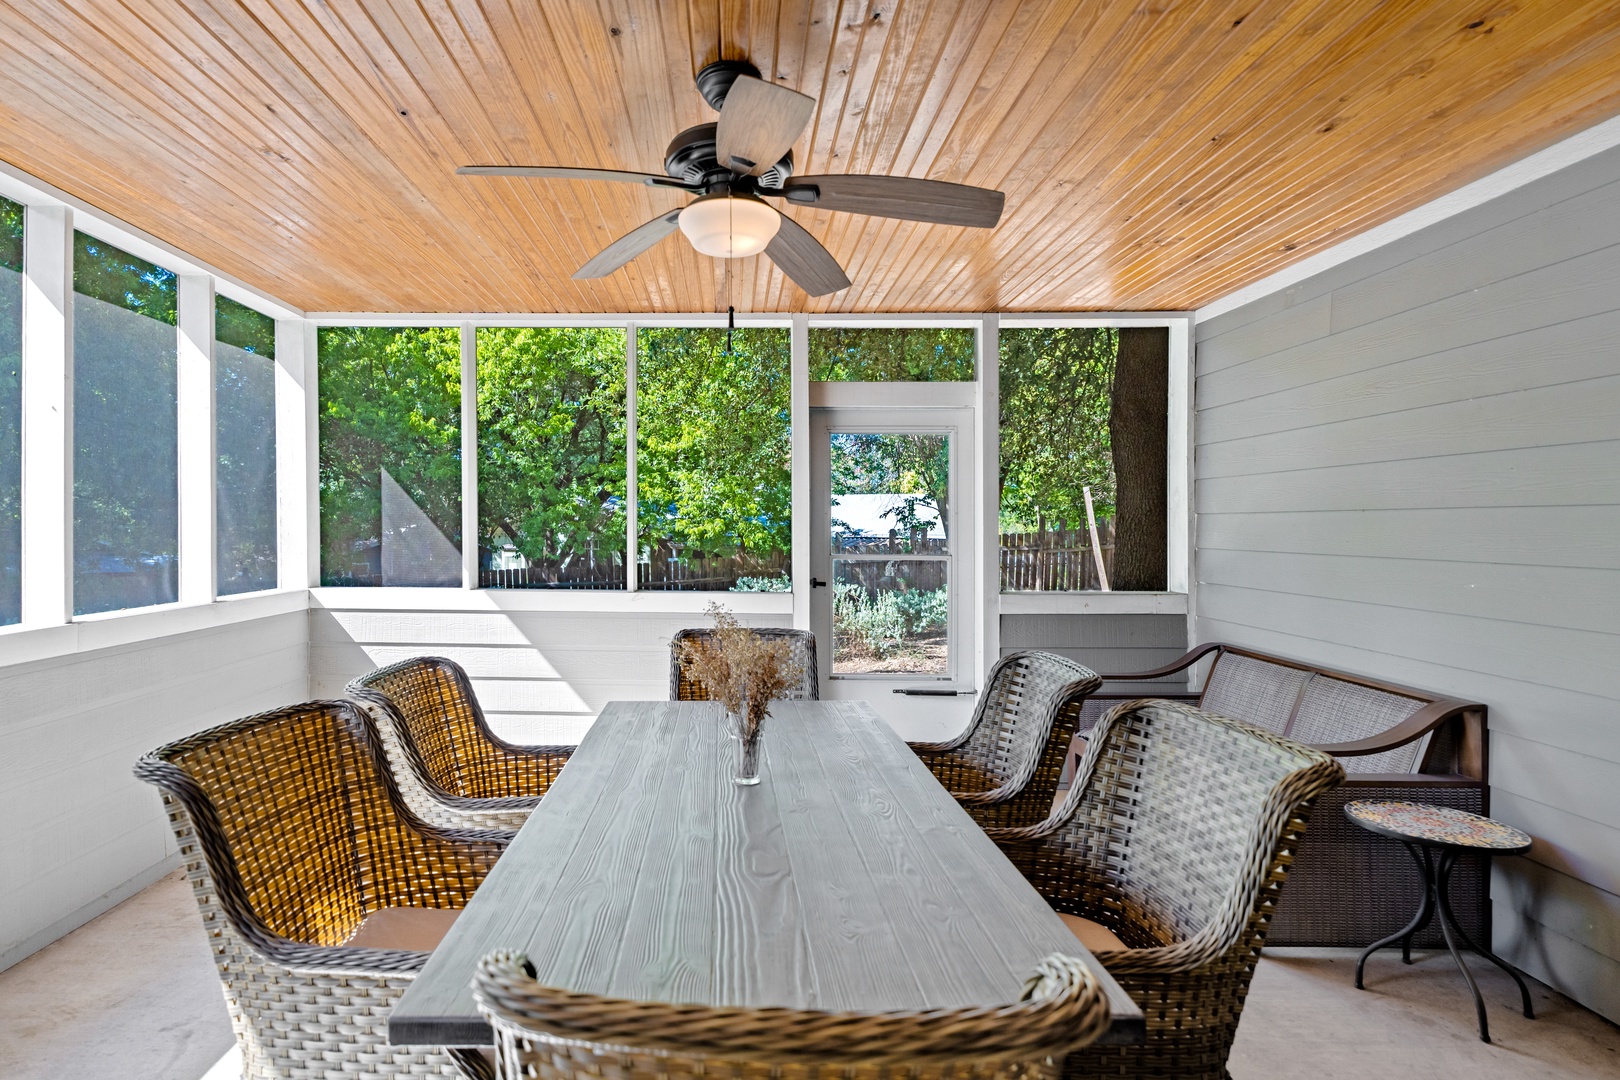 Screened porch with table and seating for 6